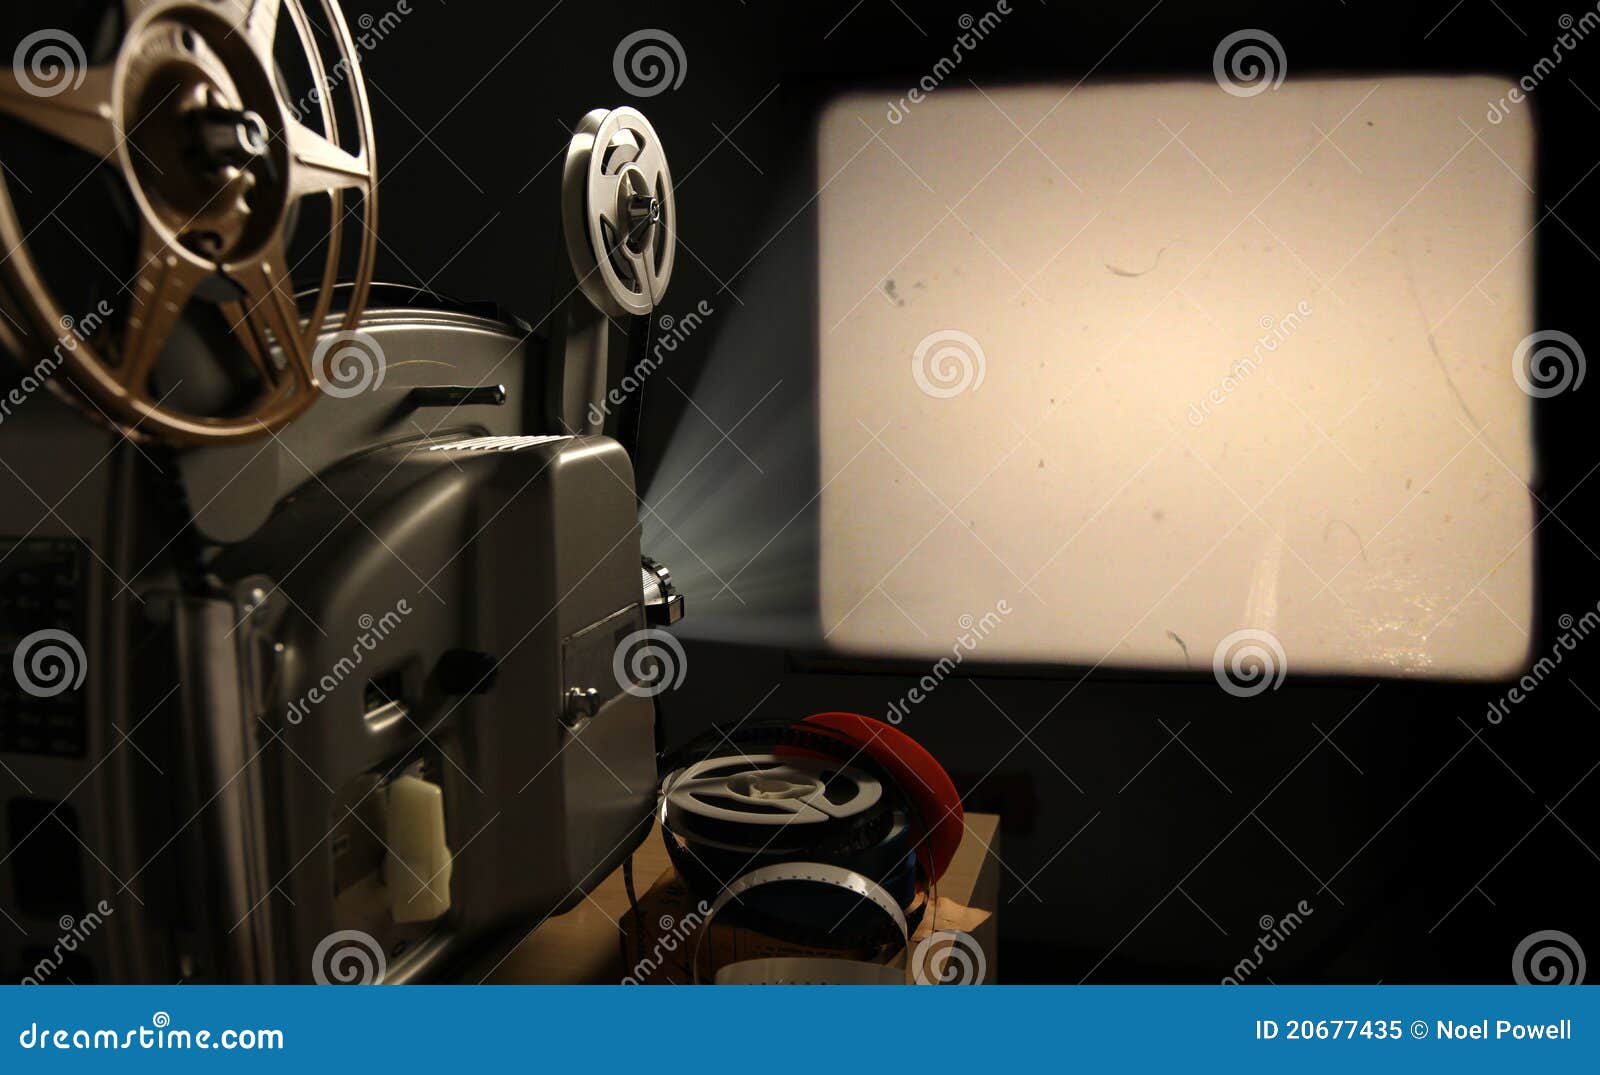 Film Projector with Blank Frame Stock Image - Image of cinema, beam:  20677435